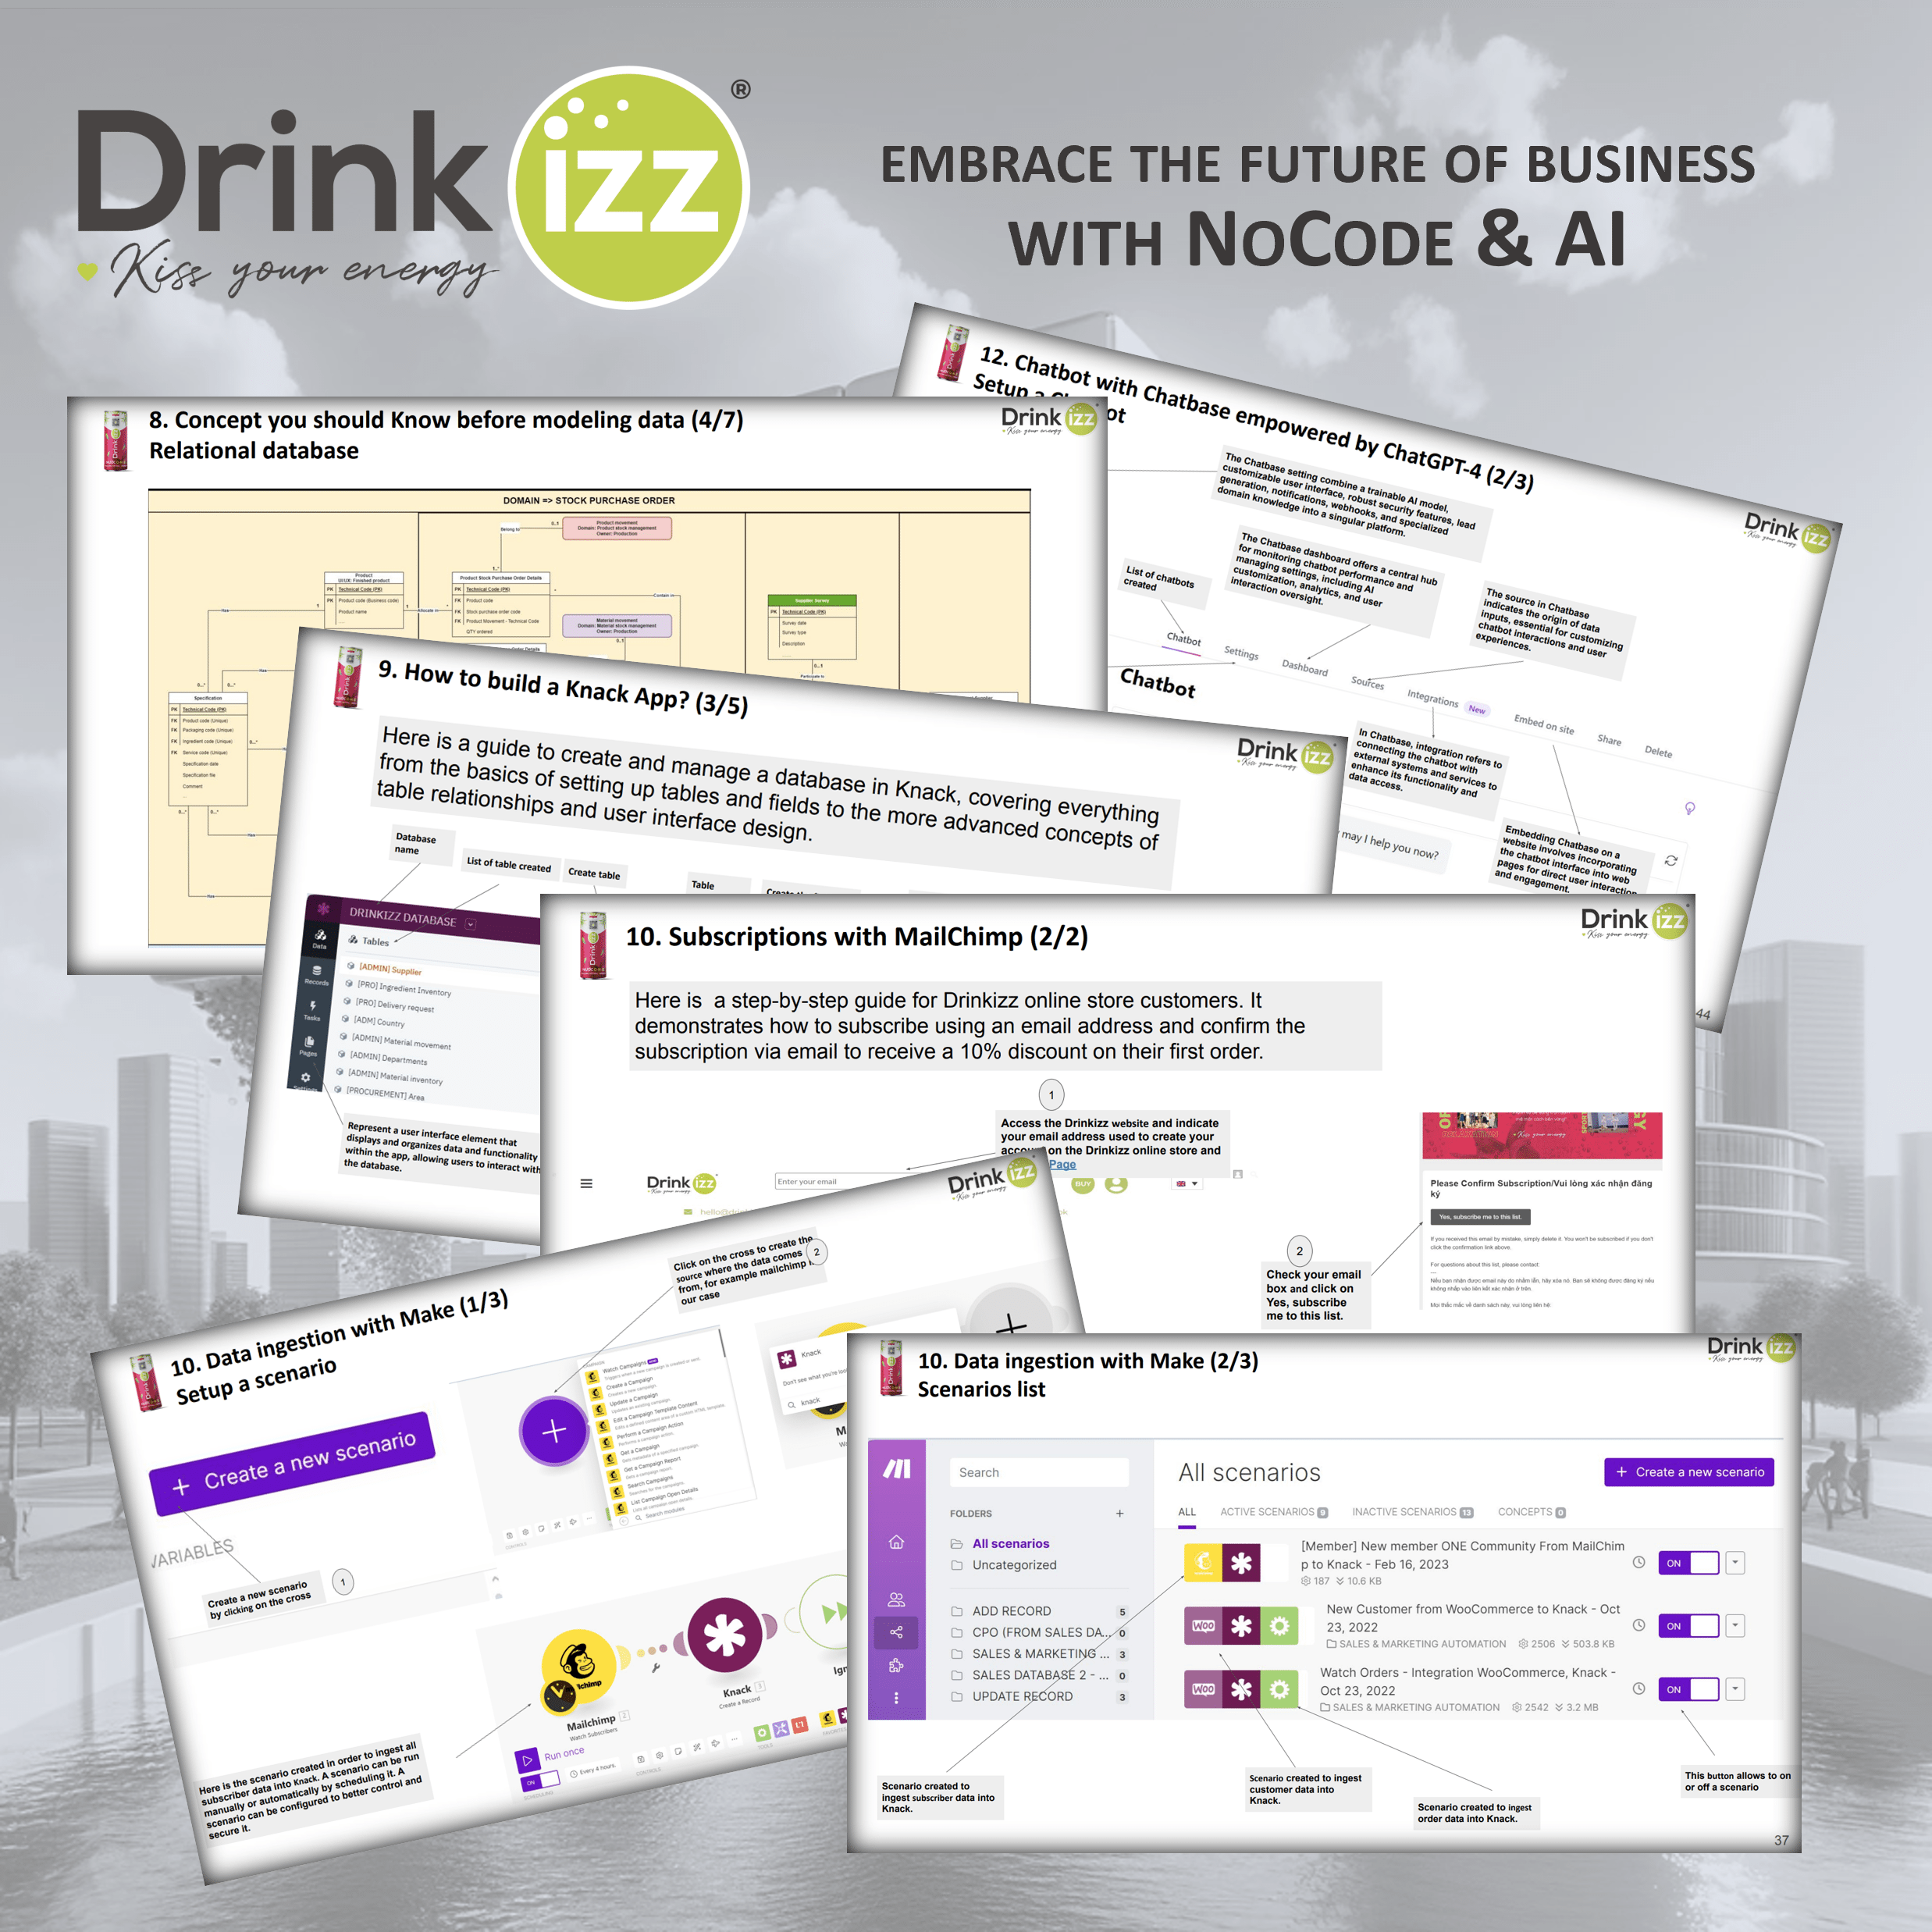 Embrace the future of business with NoCode & AI (Drinkizz use case)